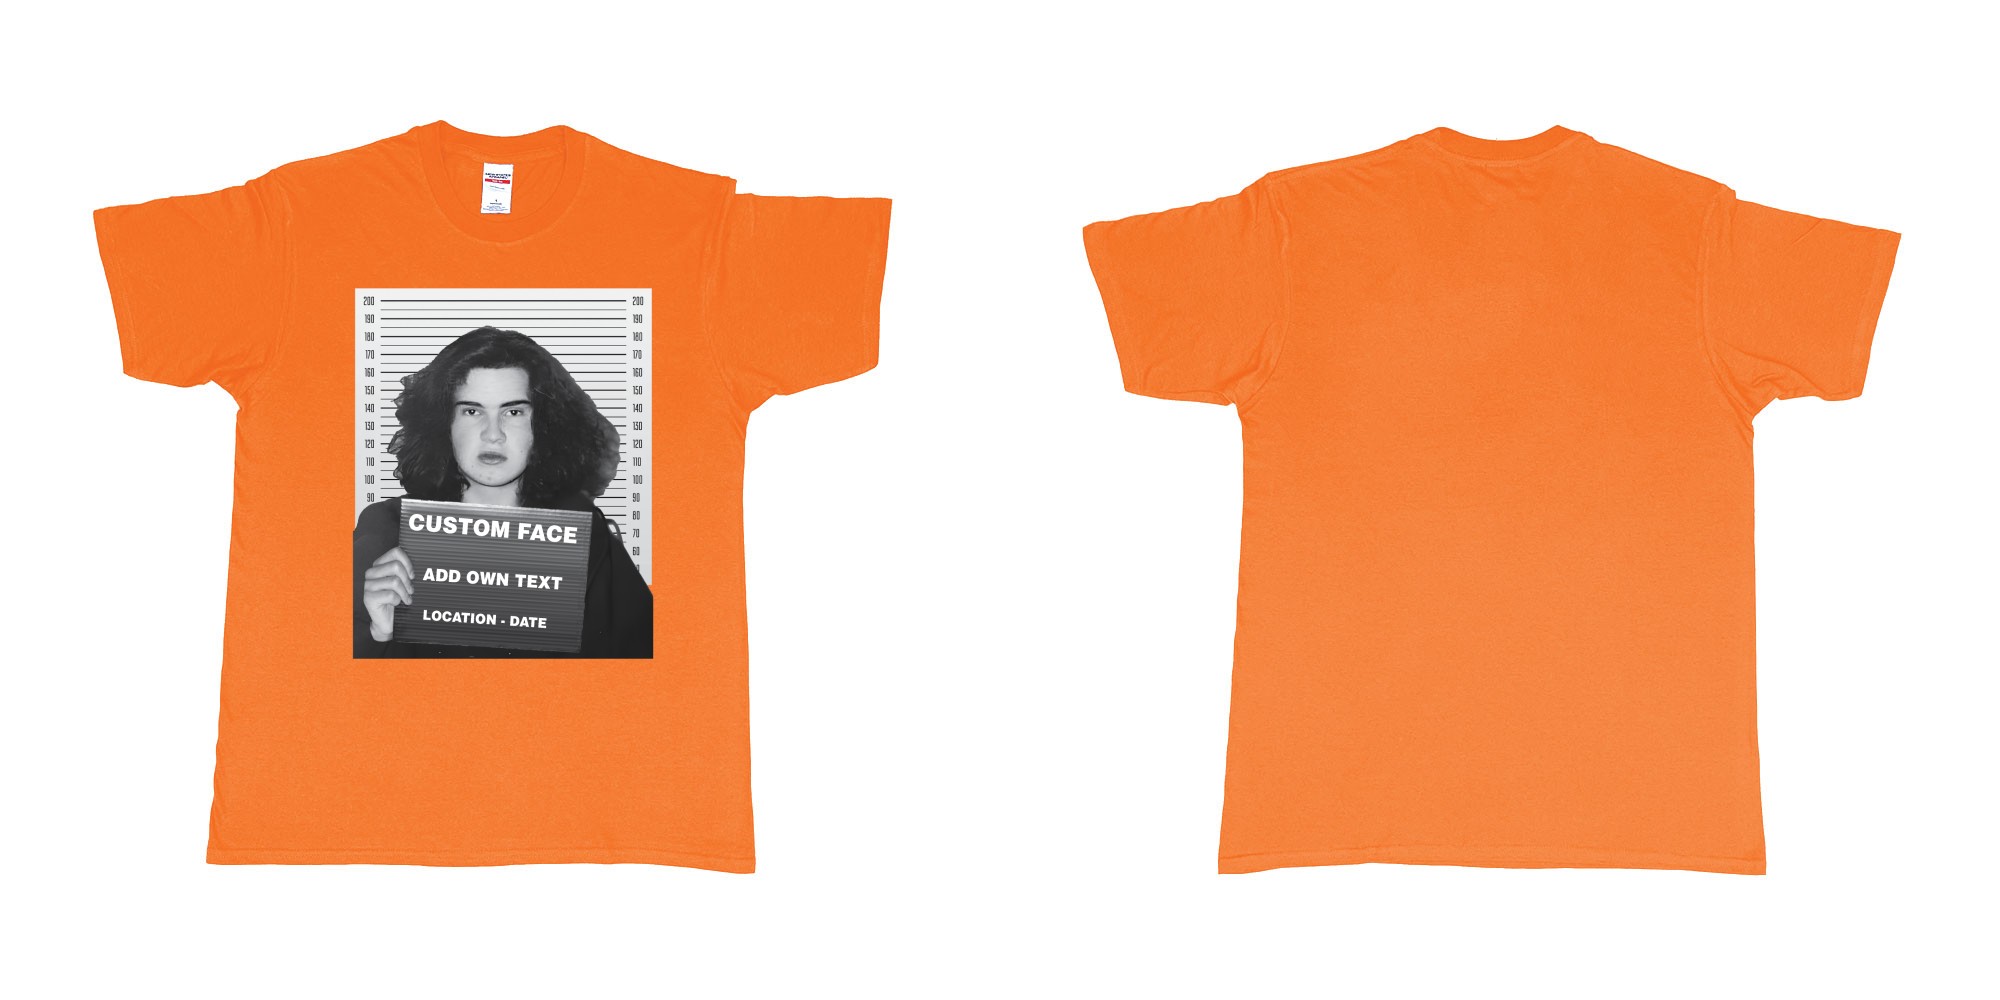 Custom tshirt design jimmy carr arrested bali mugshot in fabric color orange choice your own text made in Bali by The Pirate Way